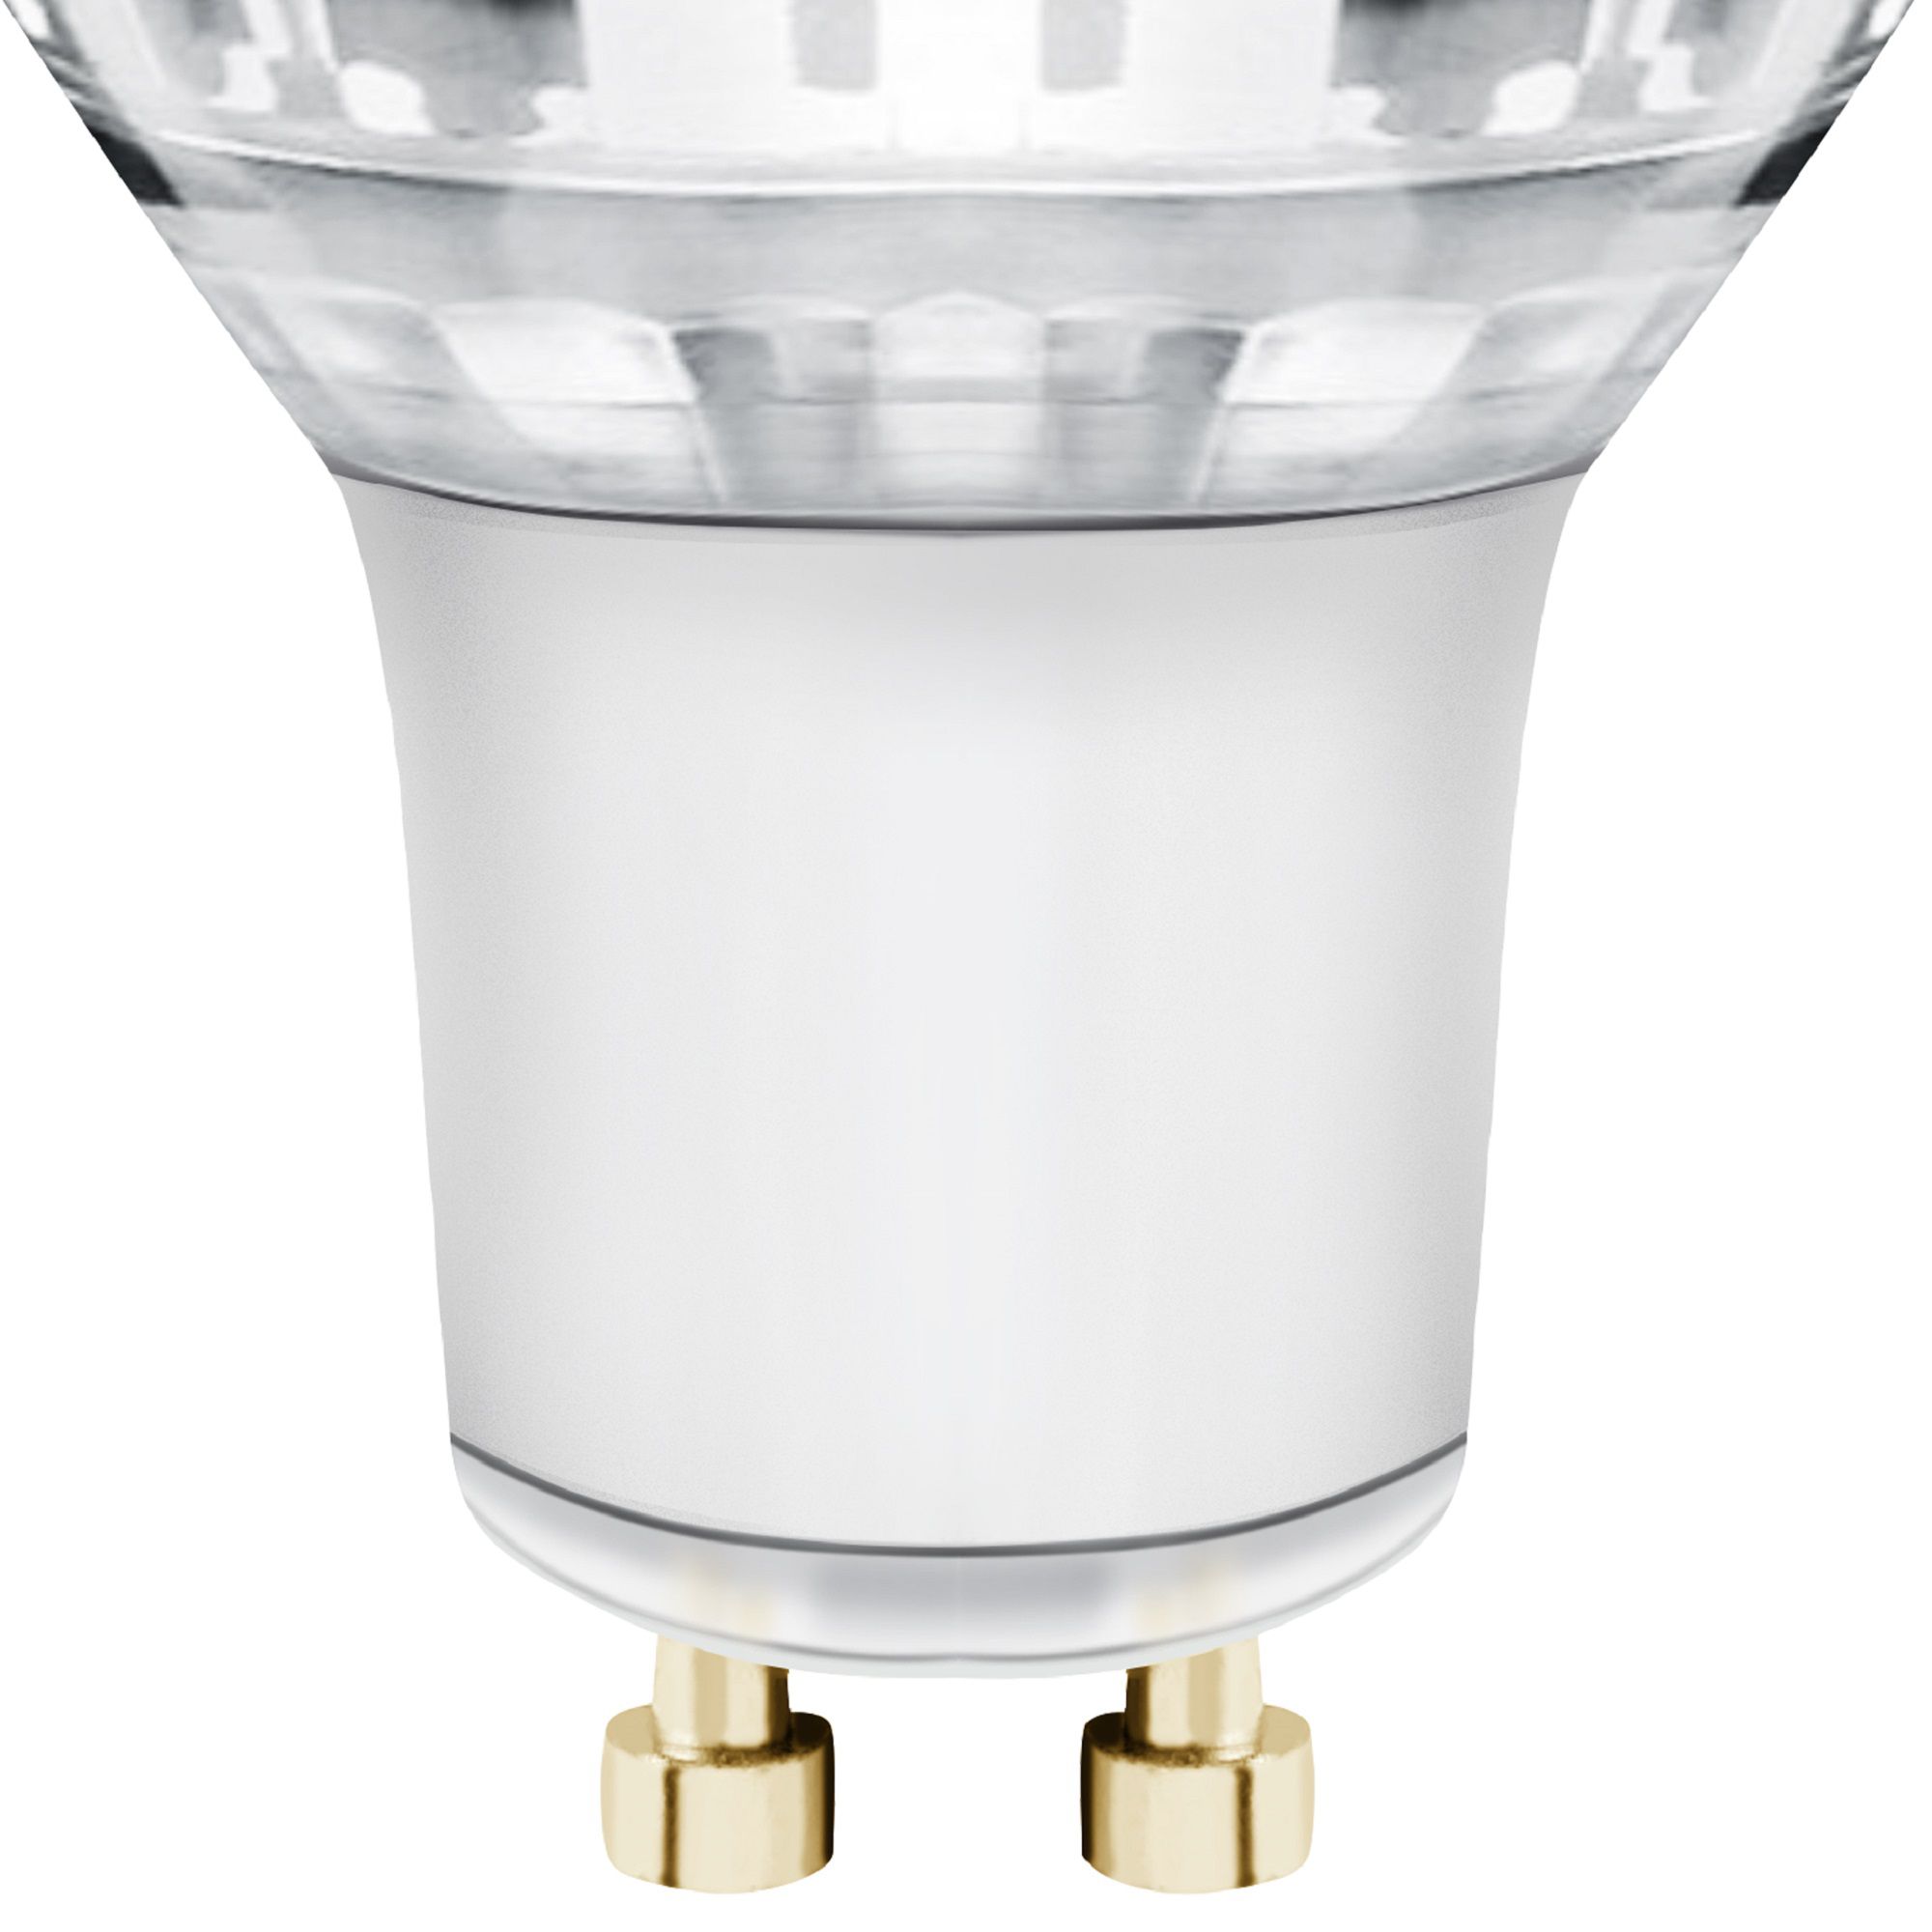 Diall GU10 | of 3 345lm B&Q DIY white at Pack Warm bulb, Dimmable Light 4.5W Reflector LED